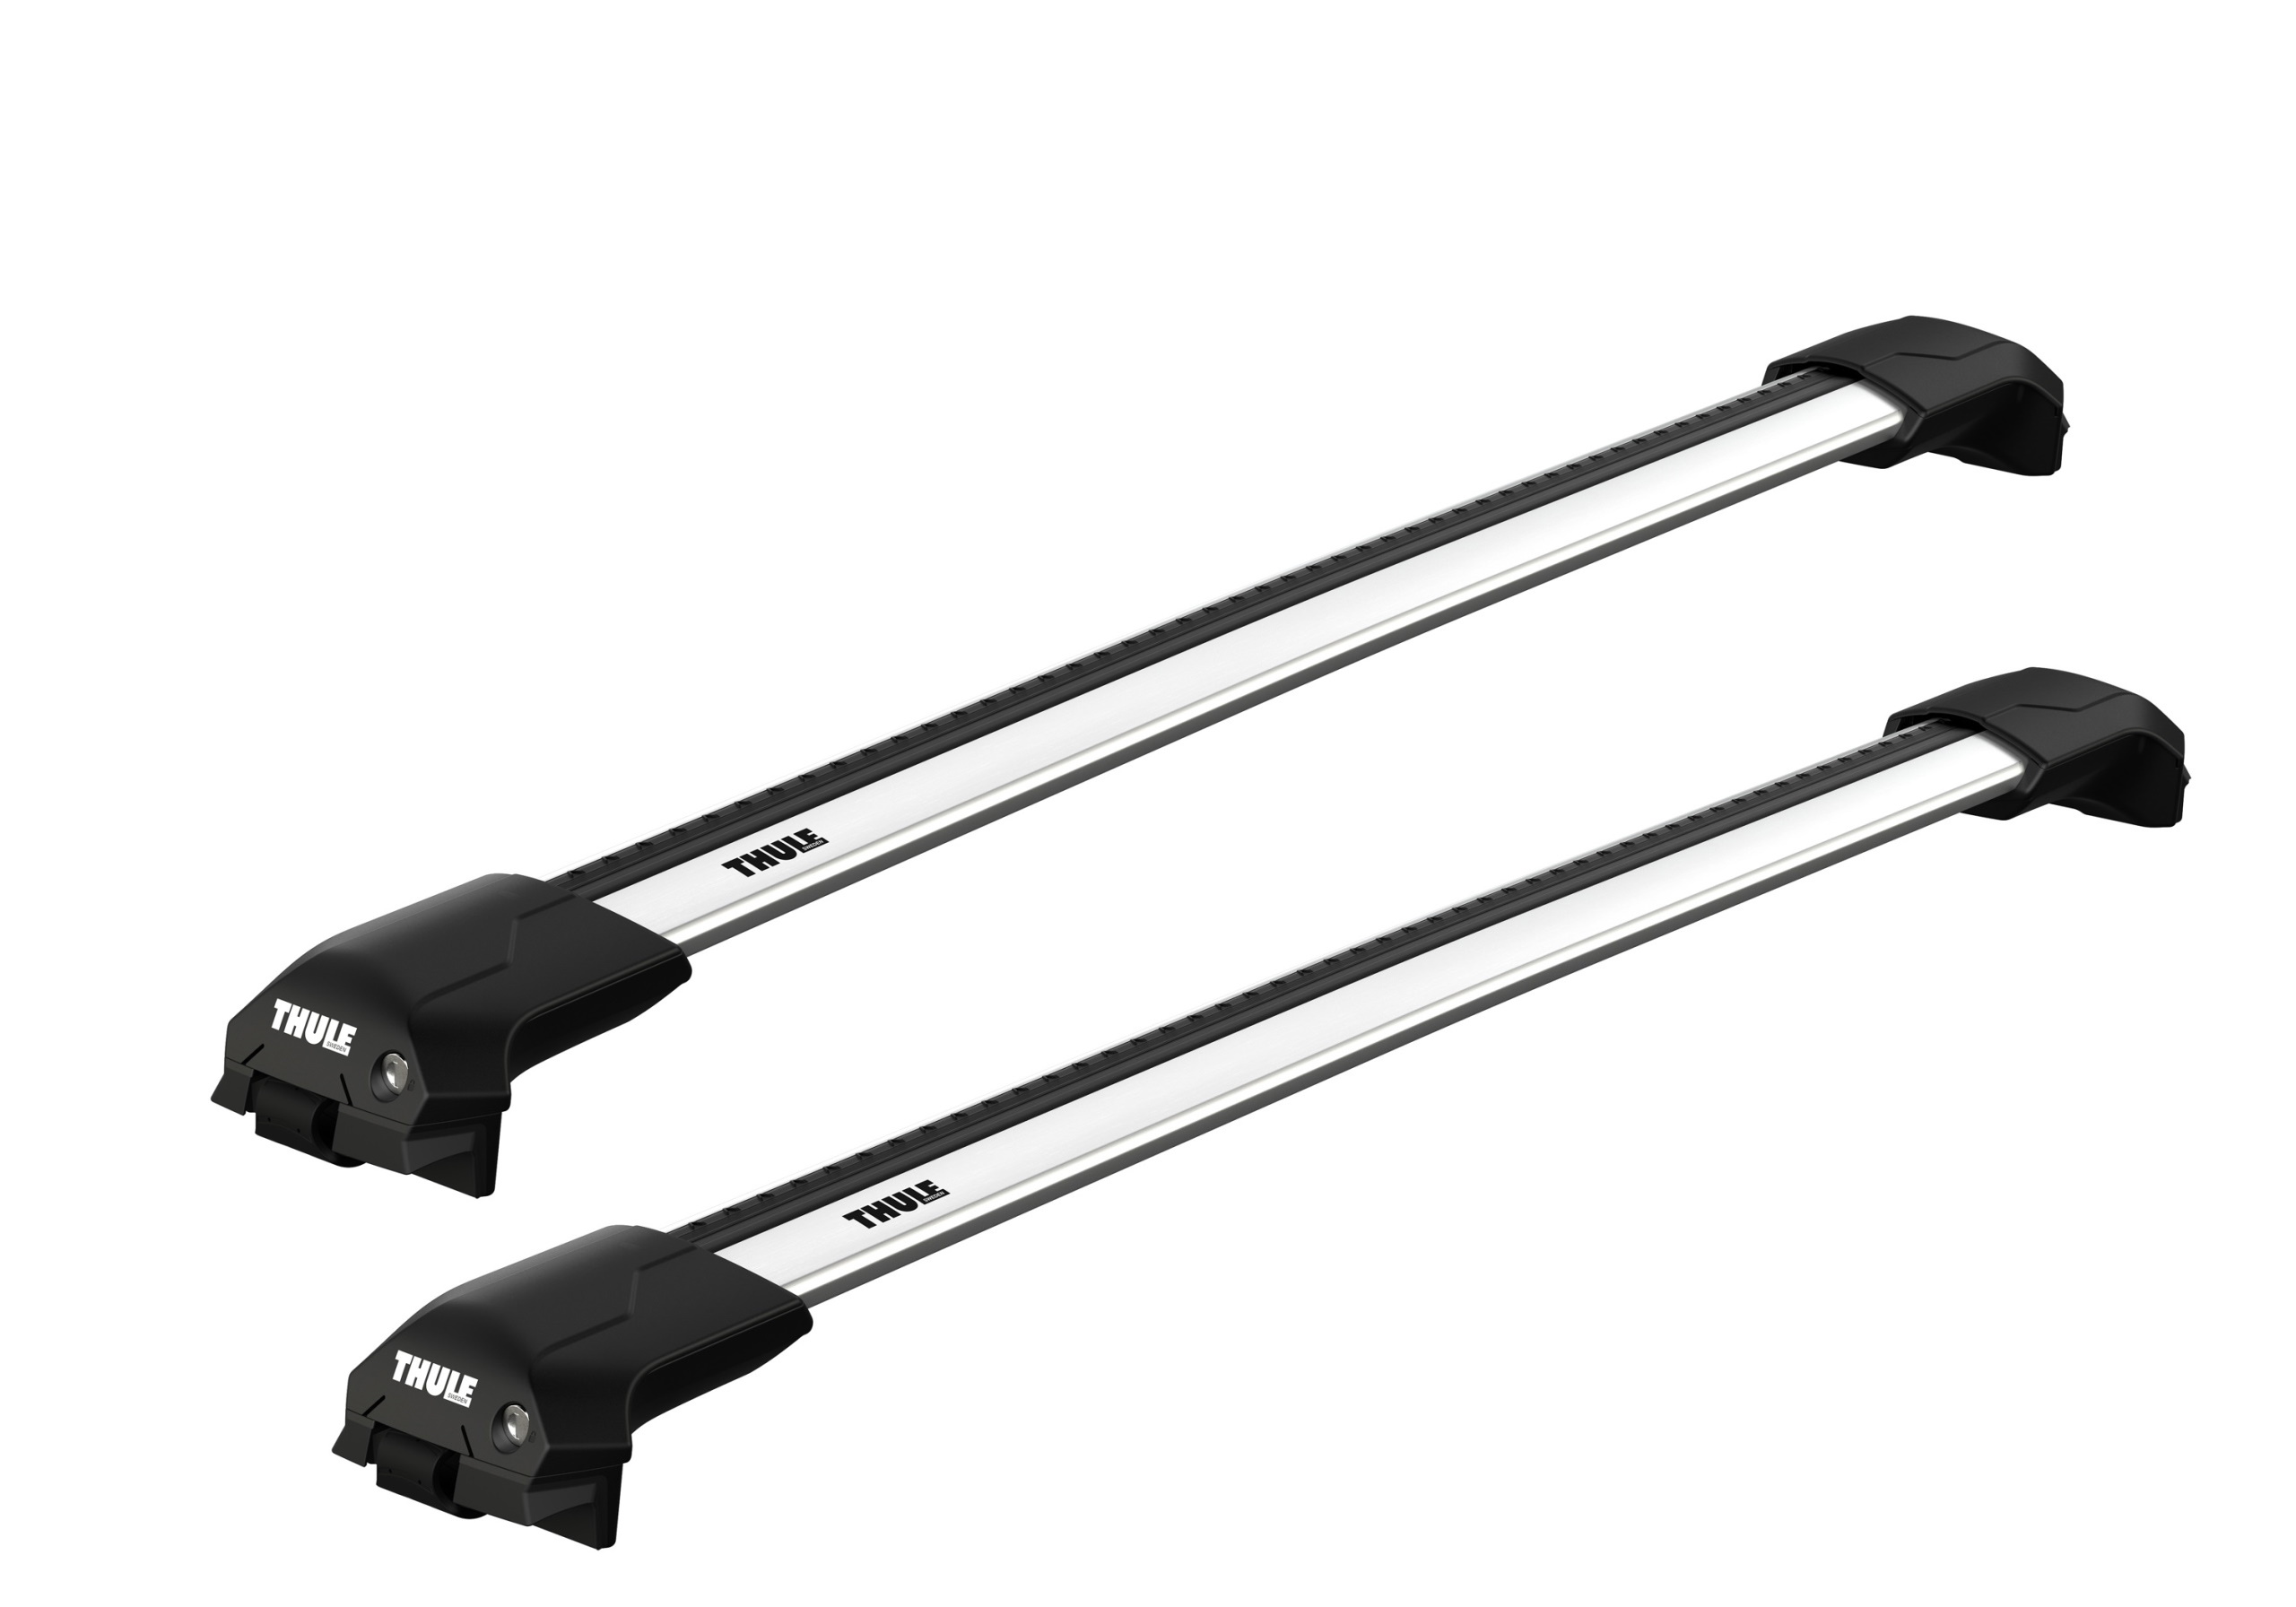 Jeep Patriot (2006 to 2012):Thule Edge silver WingBars package - 7204, 7213, 7212